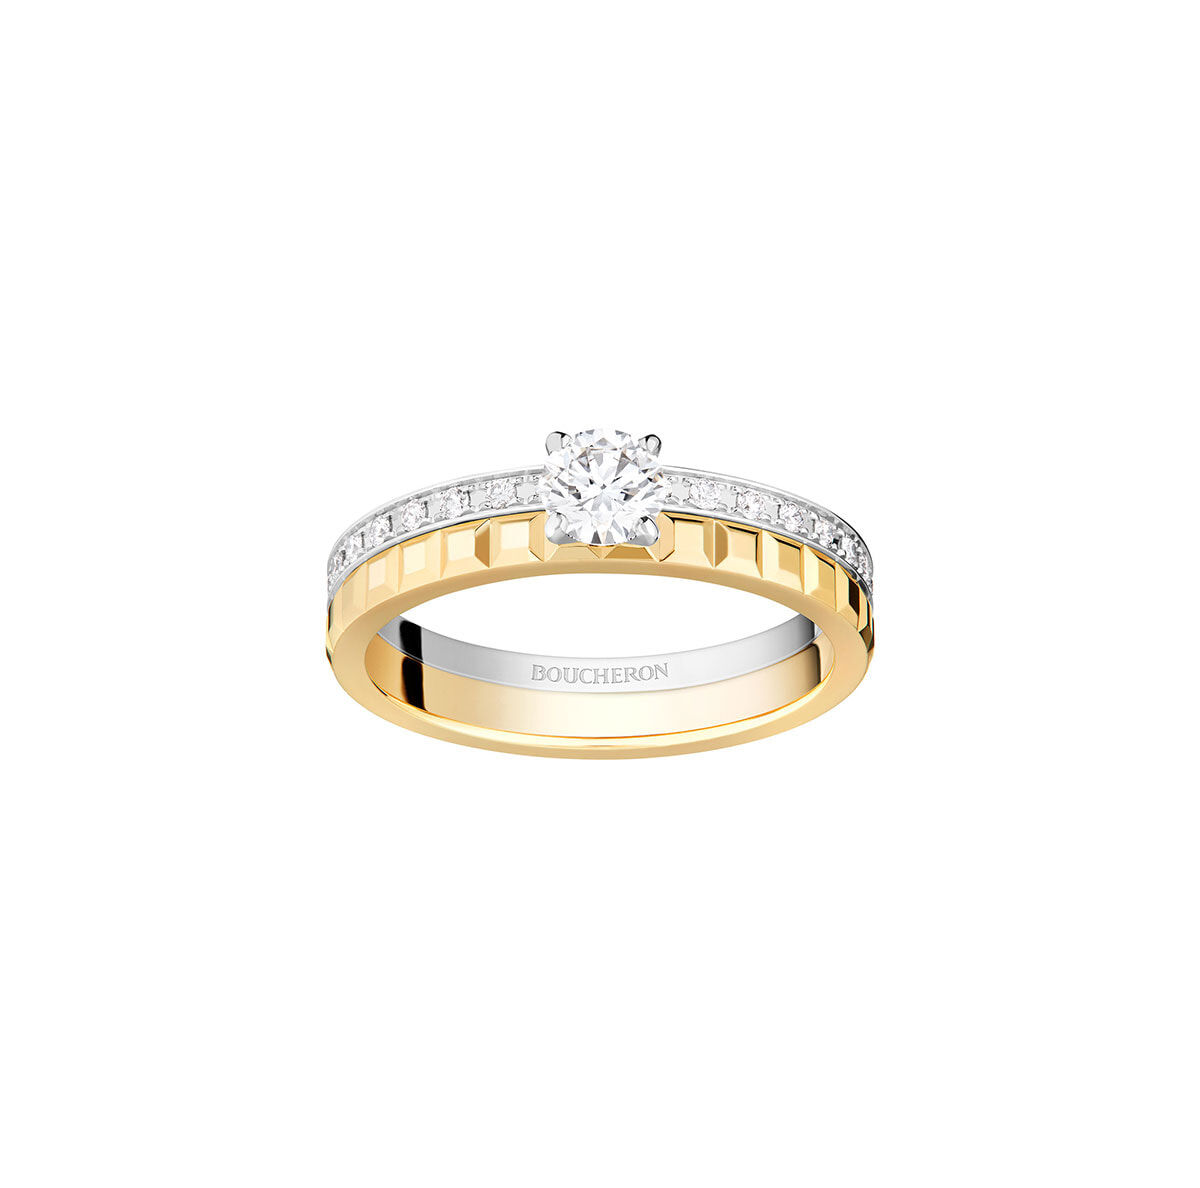 240126_1_Engagement-Ring-Quatre-Radiant-Edition-clou,-set-with-a-round-cut-diamond,-paved-with-diamonds,-in-yellow-and-white-gold.jpg